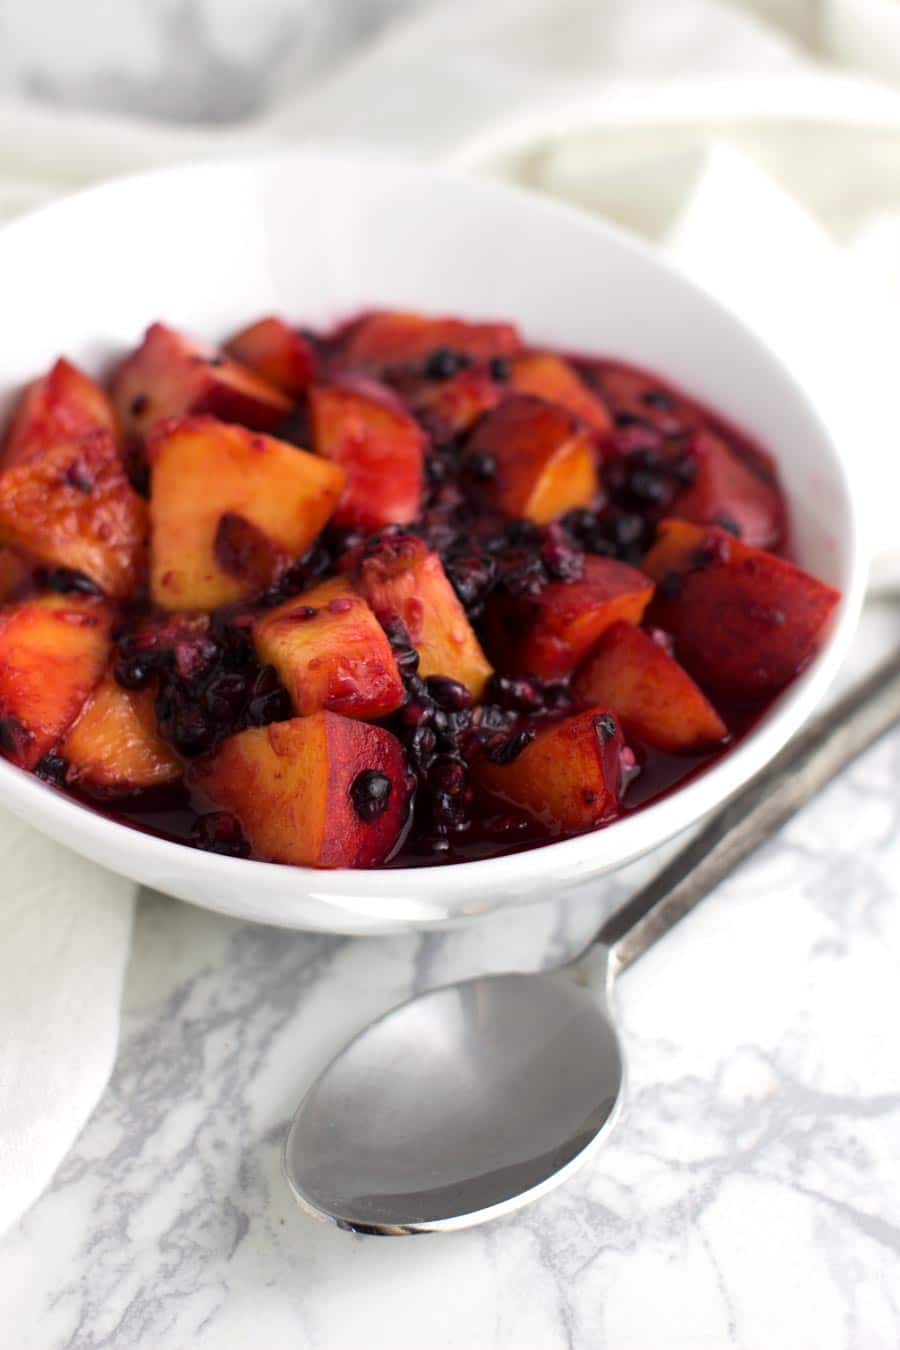 Baked Peaches with Blackberry Sauce recipe from acleanplate.com #paleo #aip #autoimmuneprotocol